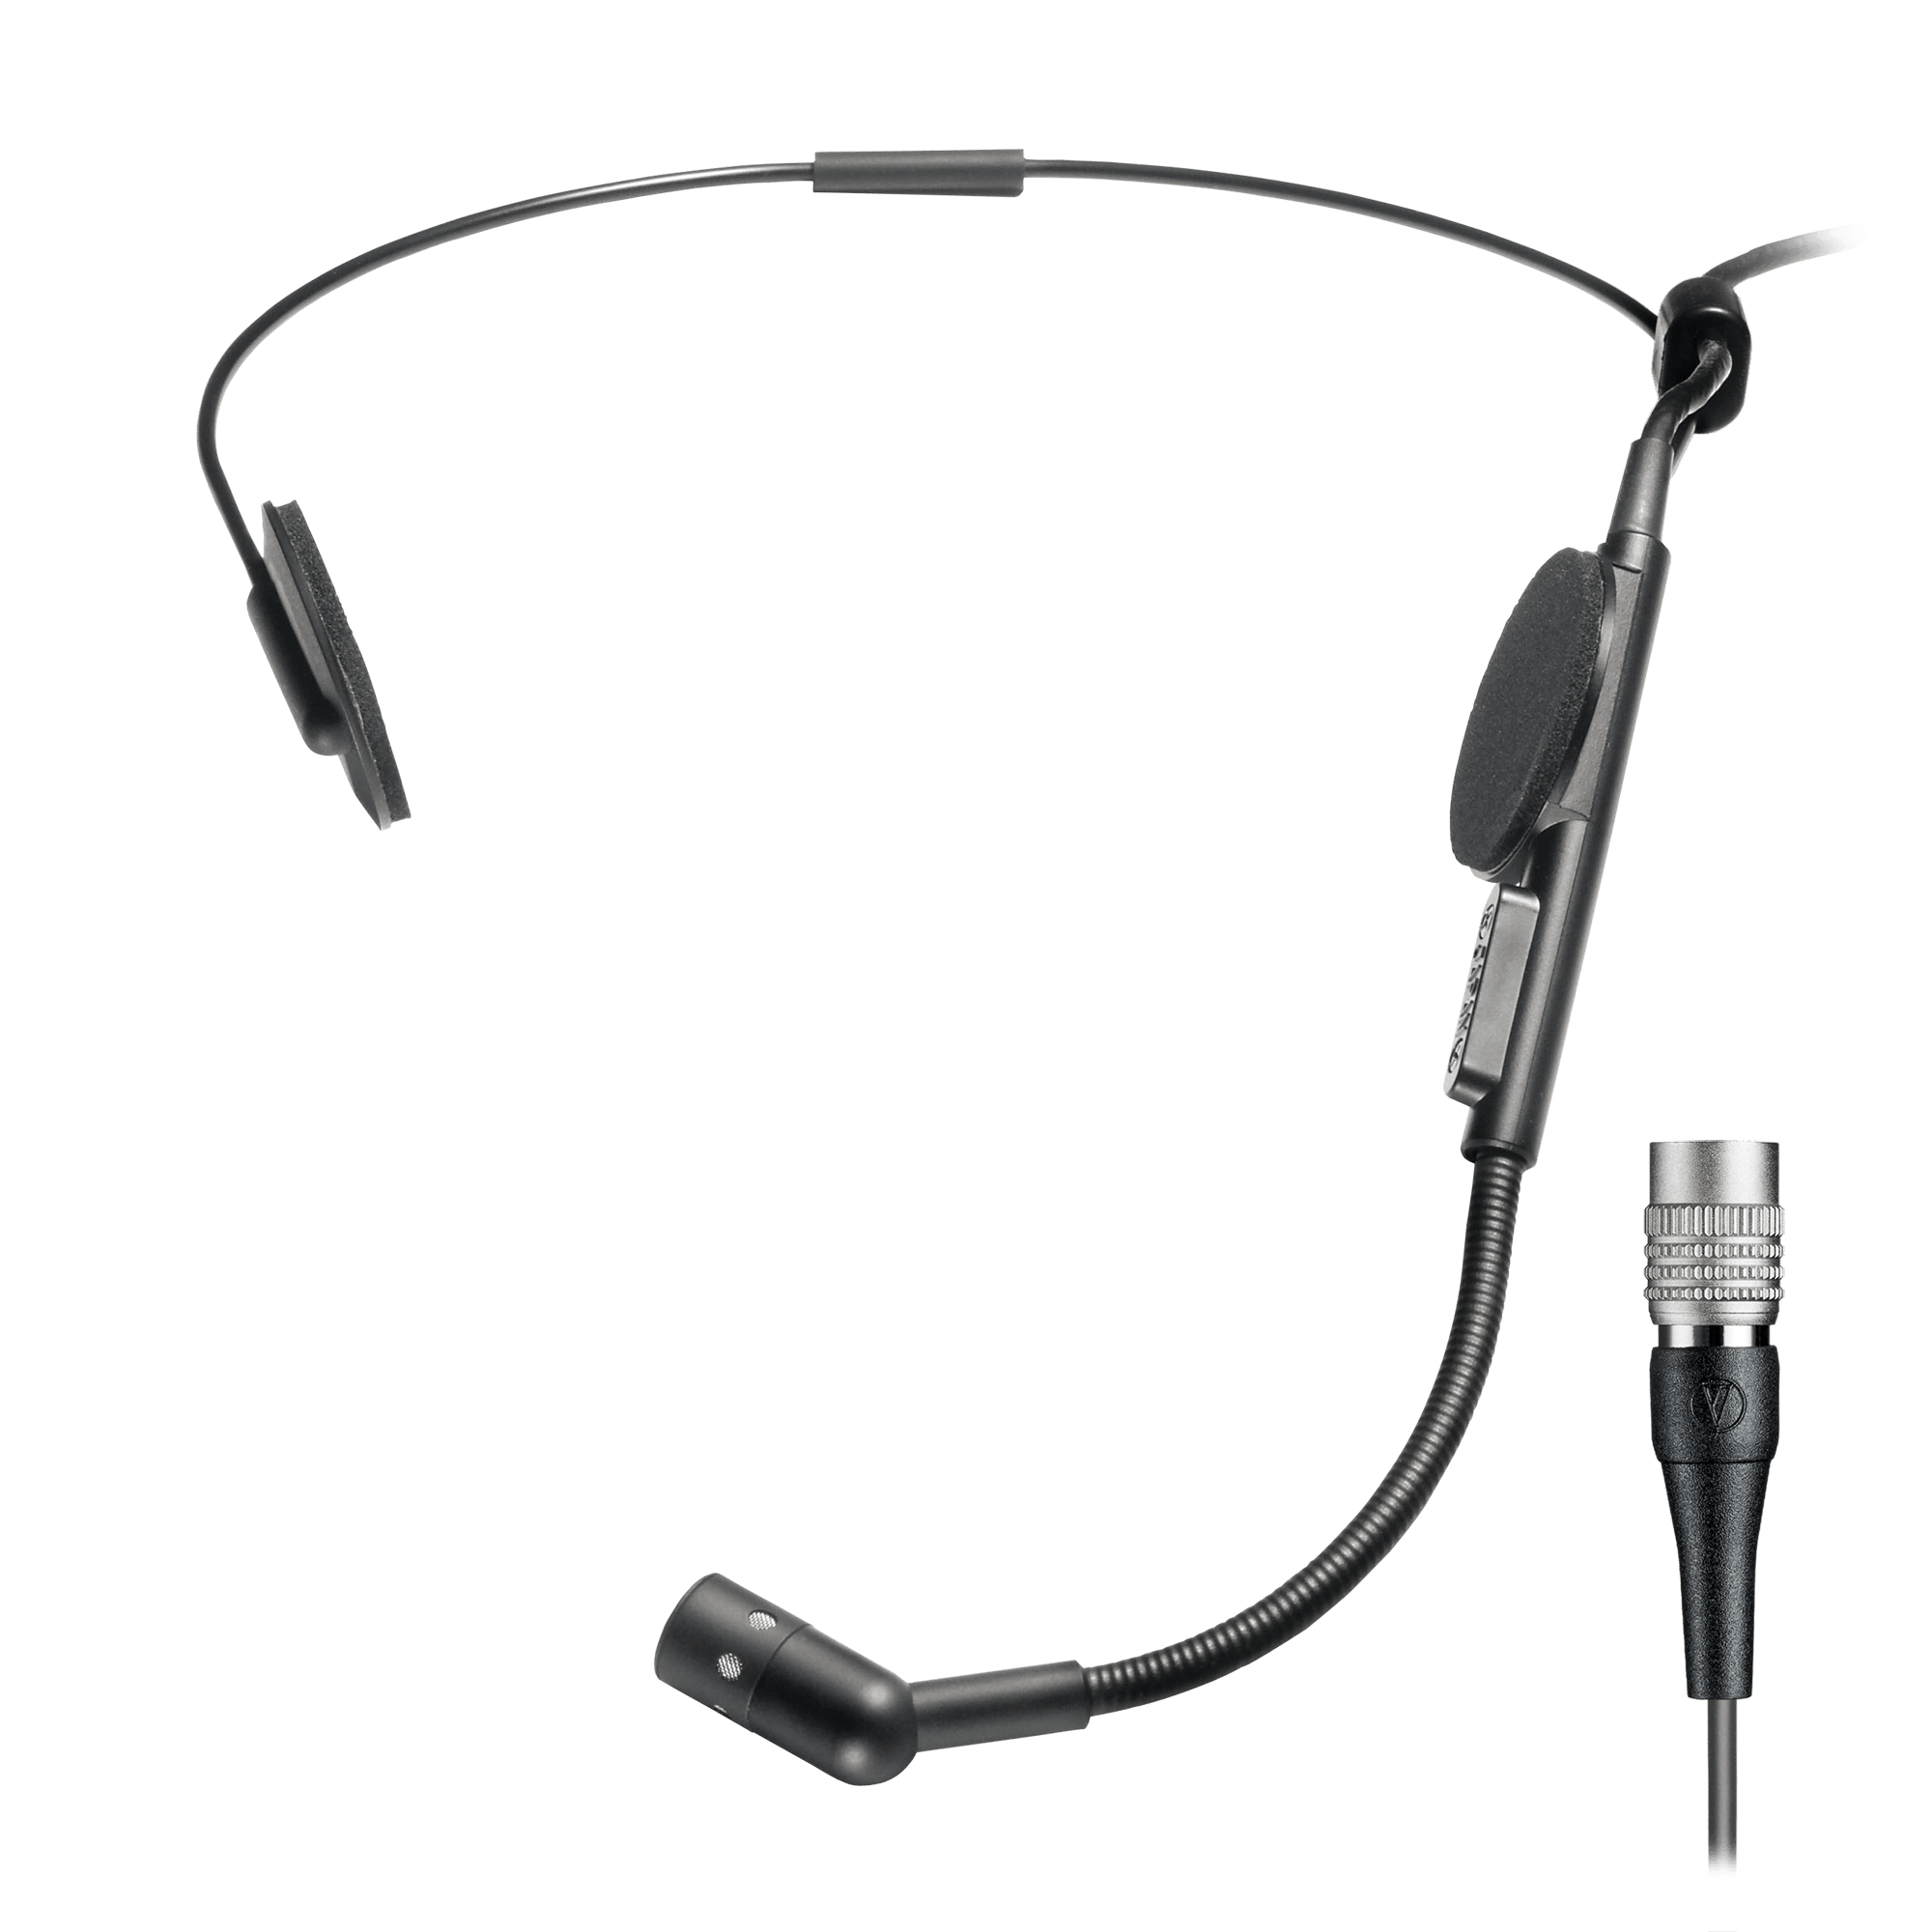 Audio Technica ATM73cW Cardioid Condenser Headset Microphone with cW connector